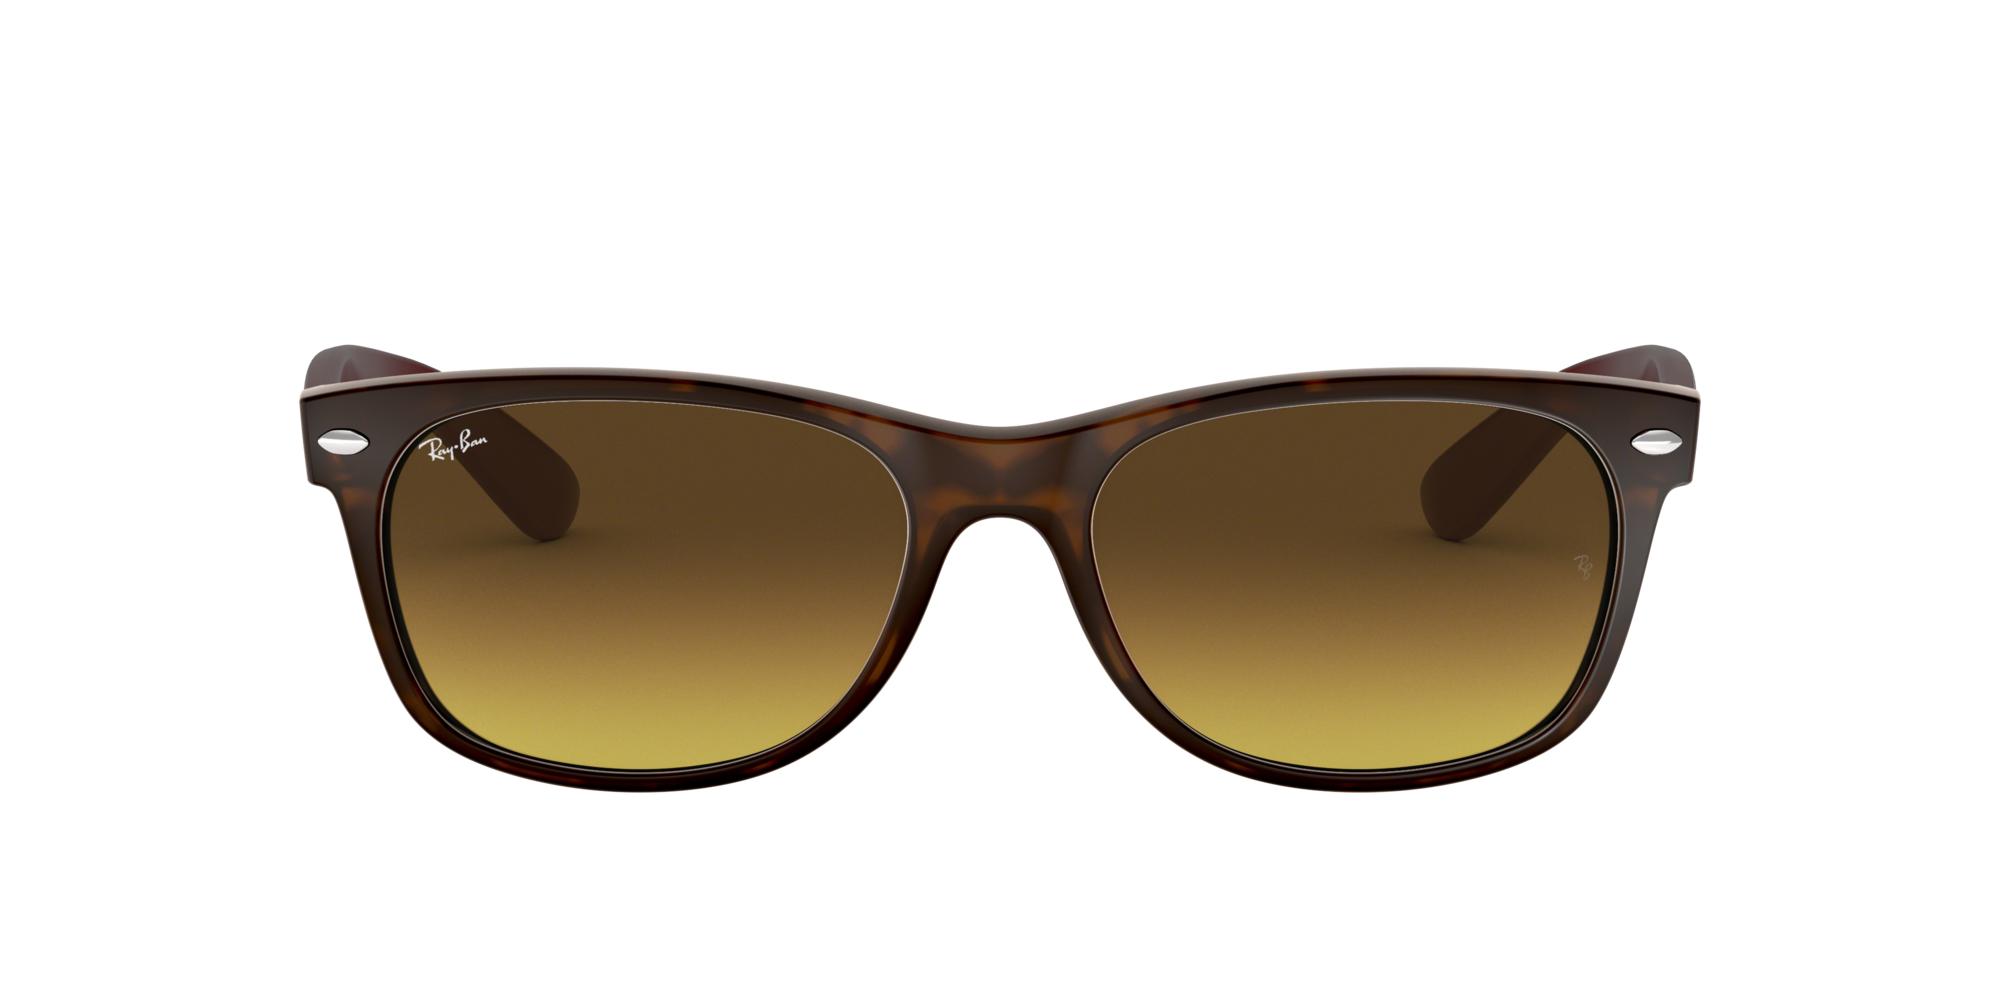 Ray-Ban Synthetic Rb2132 New Wayfarer Bicolor in Tortoise (Brown ...